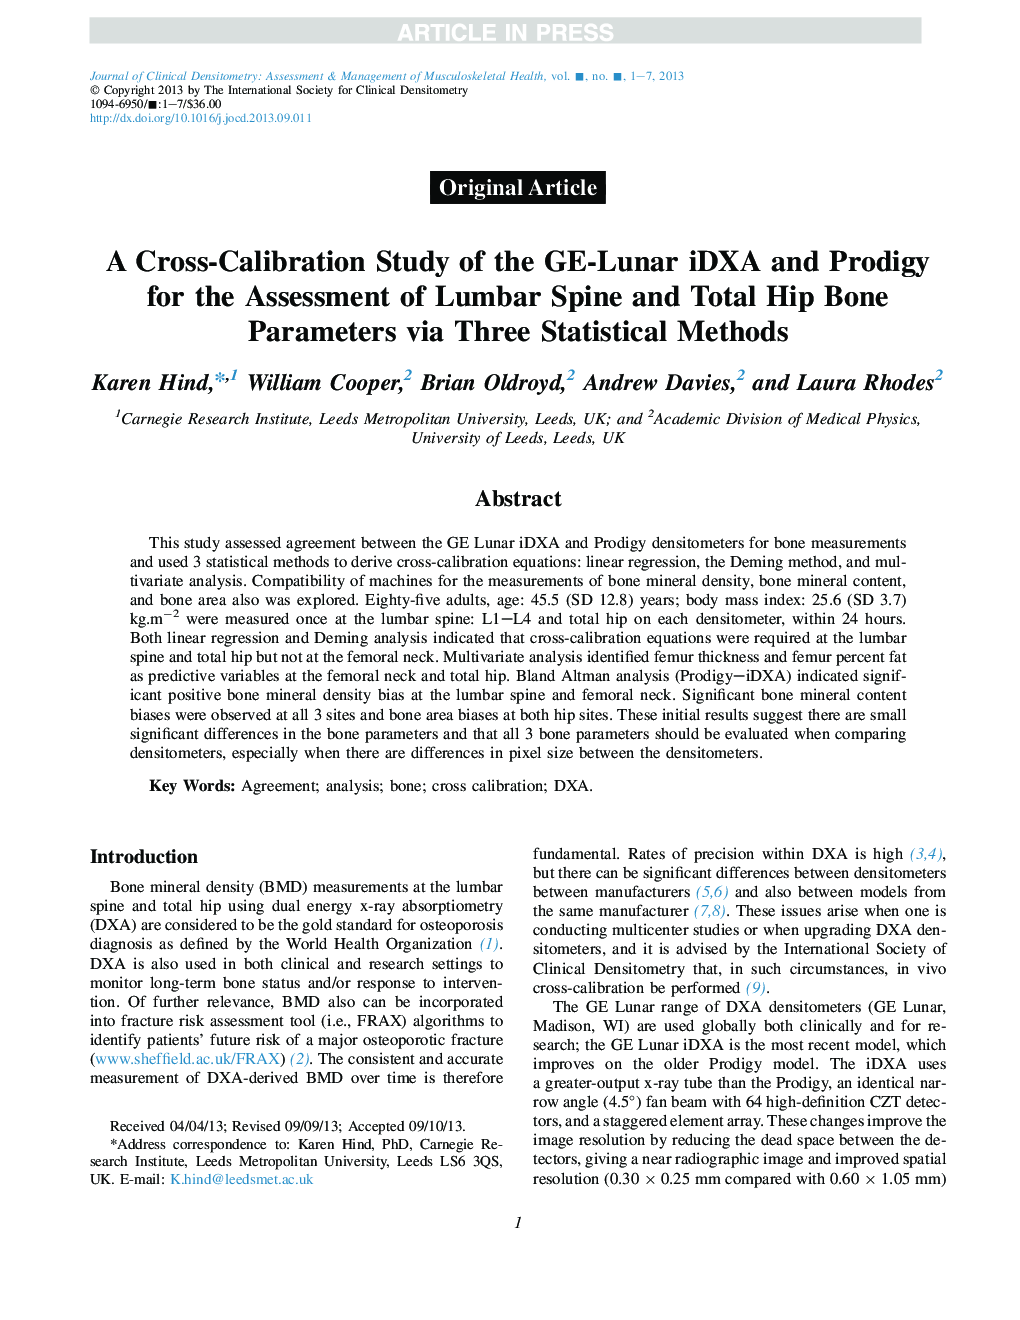 A Cross-Calibration Study of the GE-Lunar iDXA and Prodigy for the Assessment of Lumbar Spine and Total Hip Bone Parameters via Three Statistical Methods